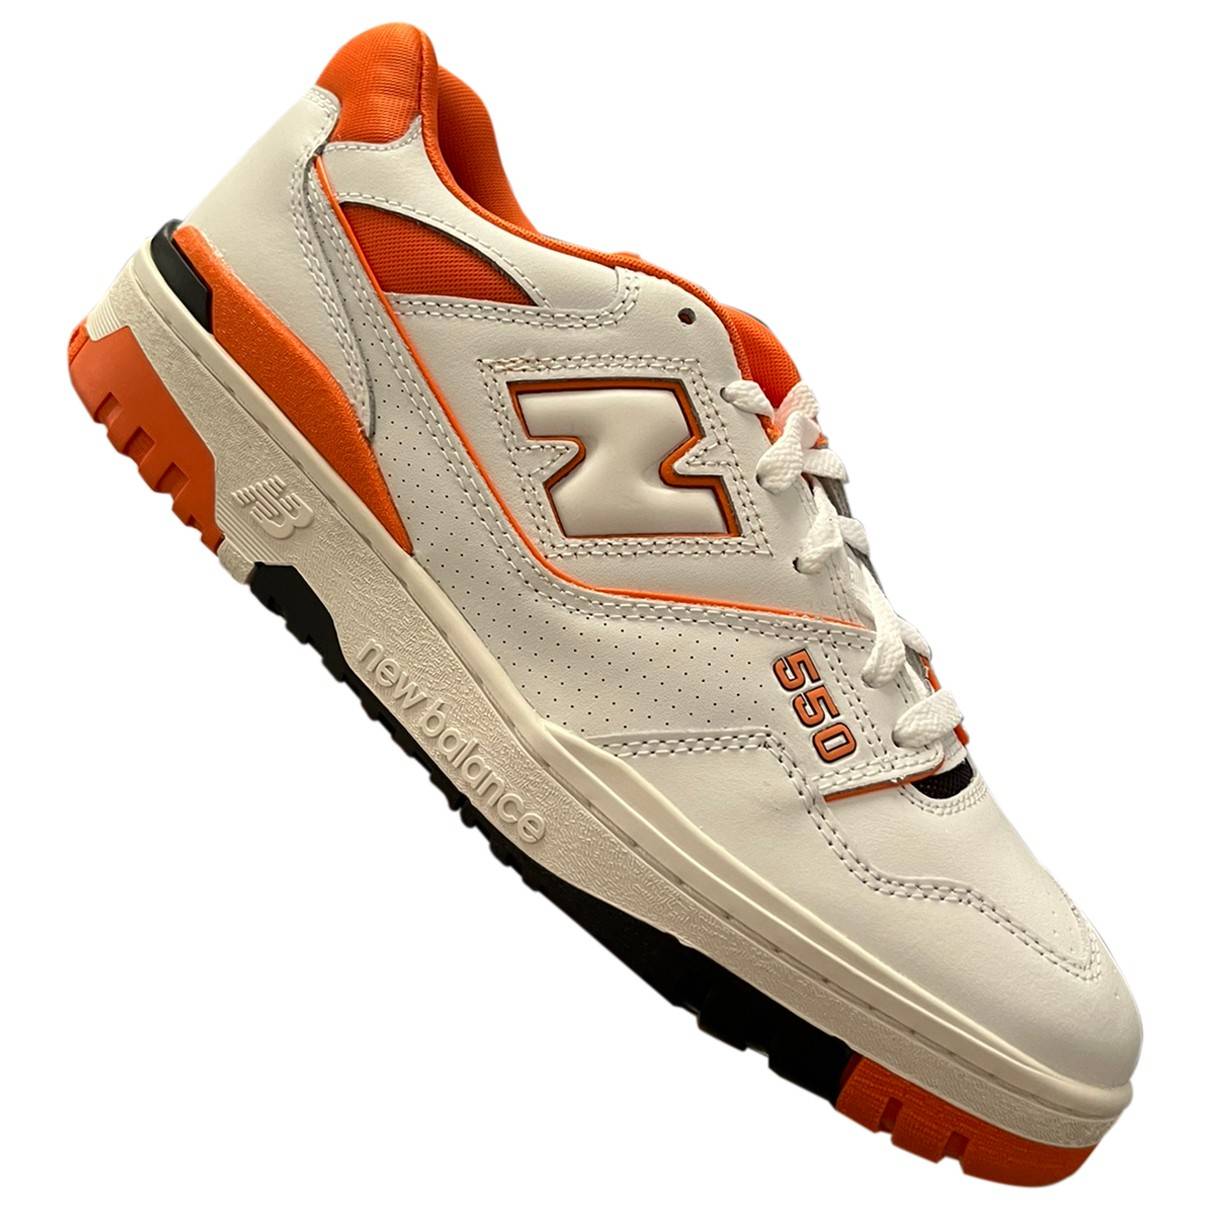 550 leather low trainers New Balance Orange size 43 EU in Leather - 23992537